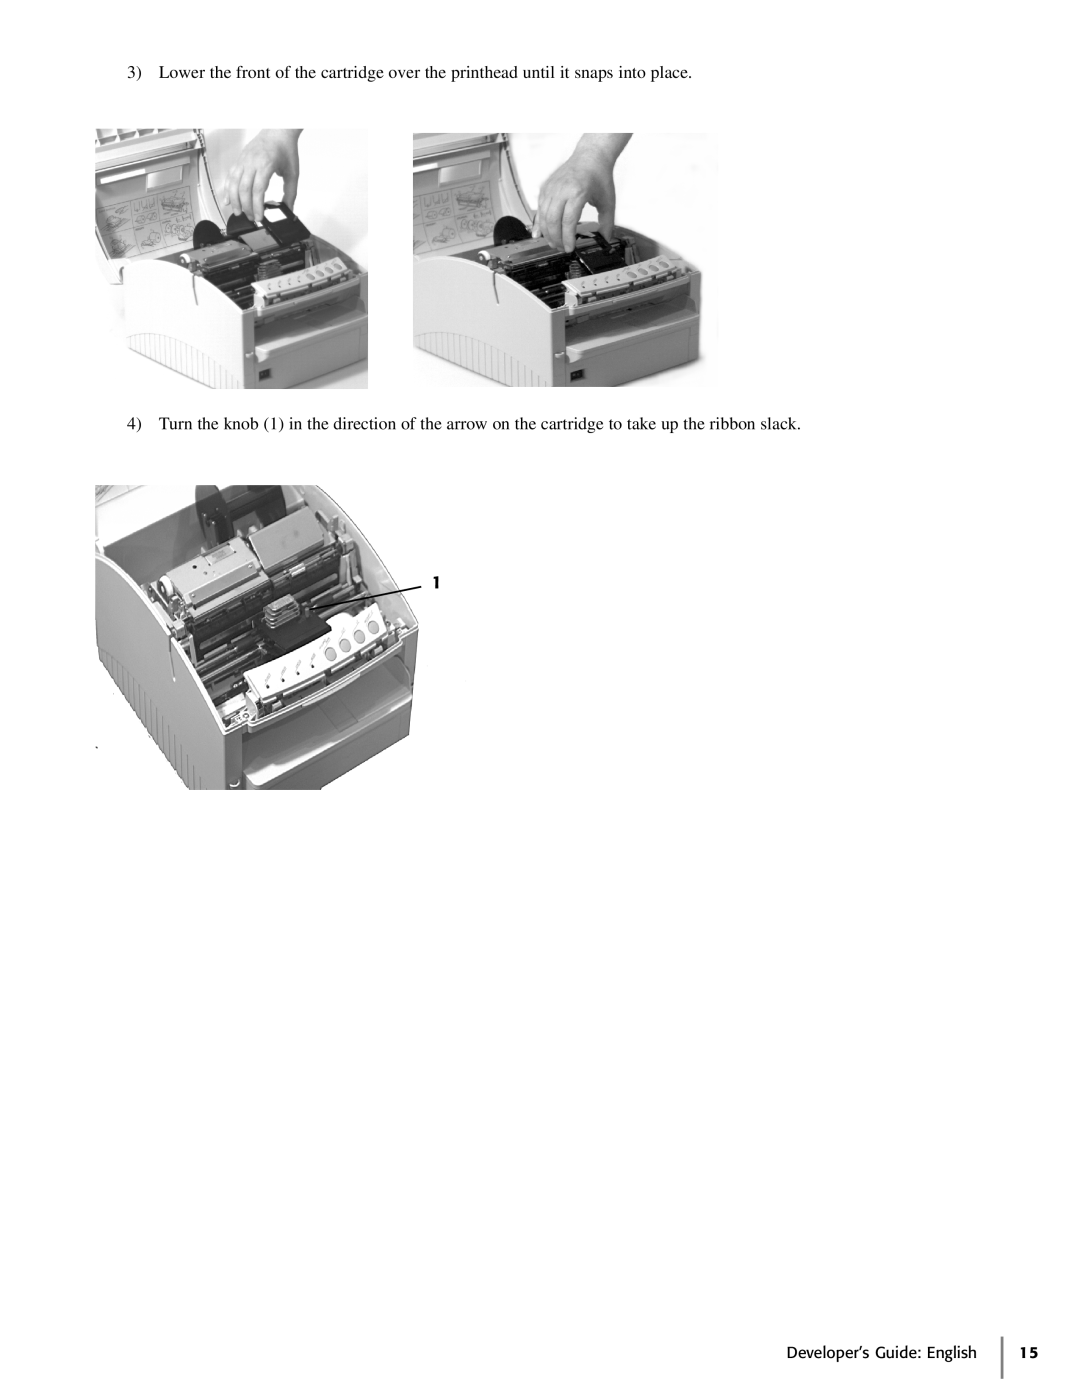 Oki 425D manual Lower the front of the cartridge over the printhead until it snaps into place 